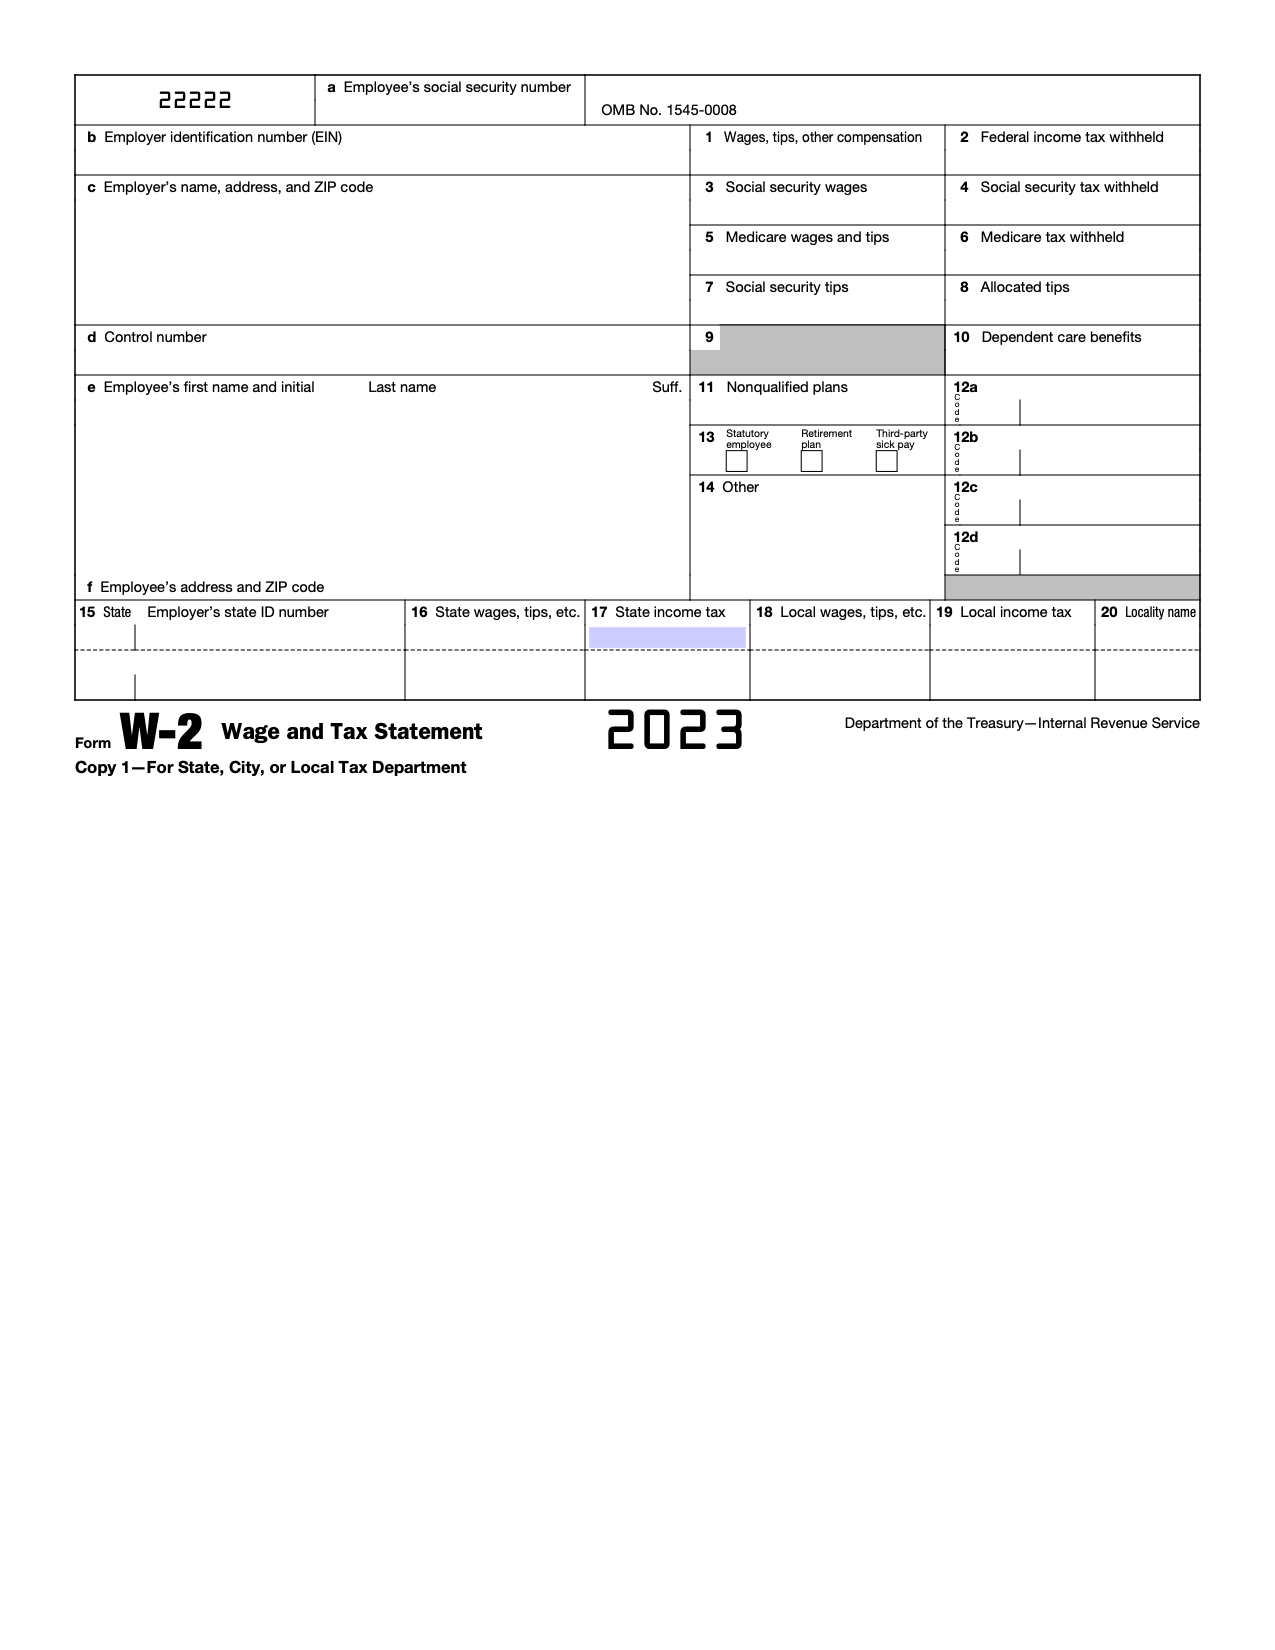 Free Irs Form W-2 | Wage And Tax Statement - Pdf – Eforms in Free Online W2 Forms